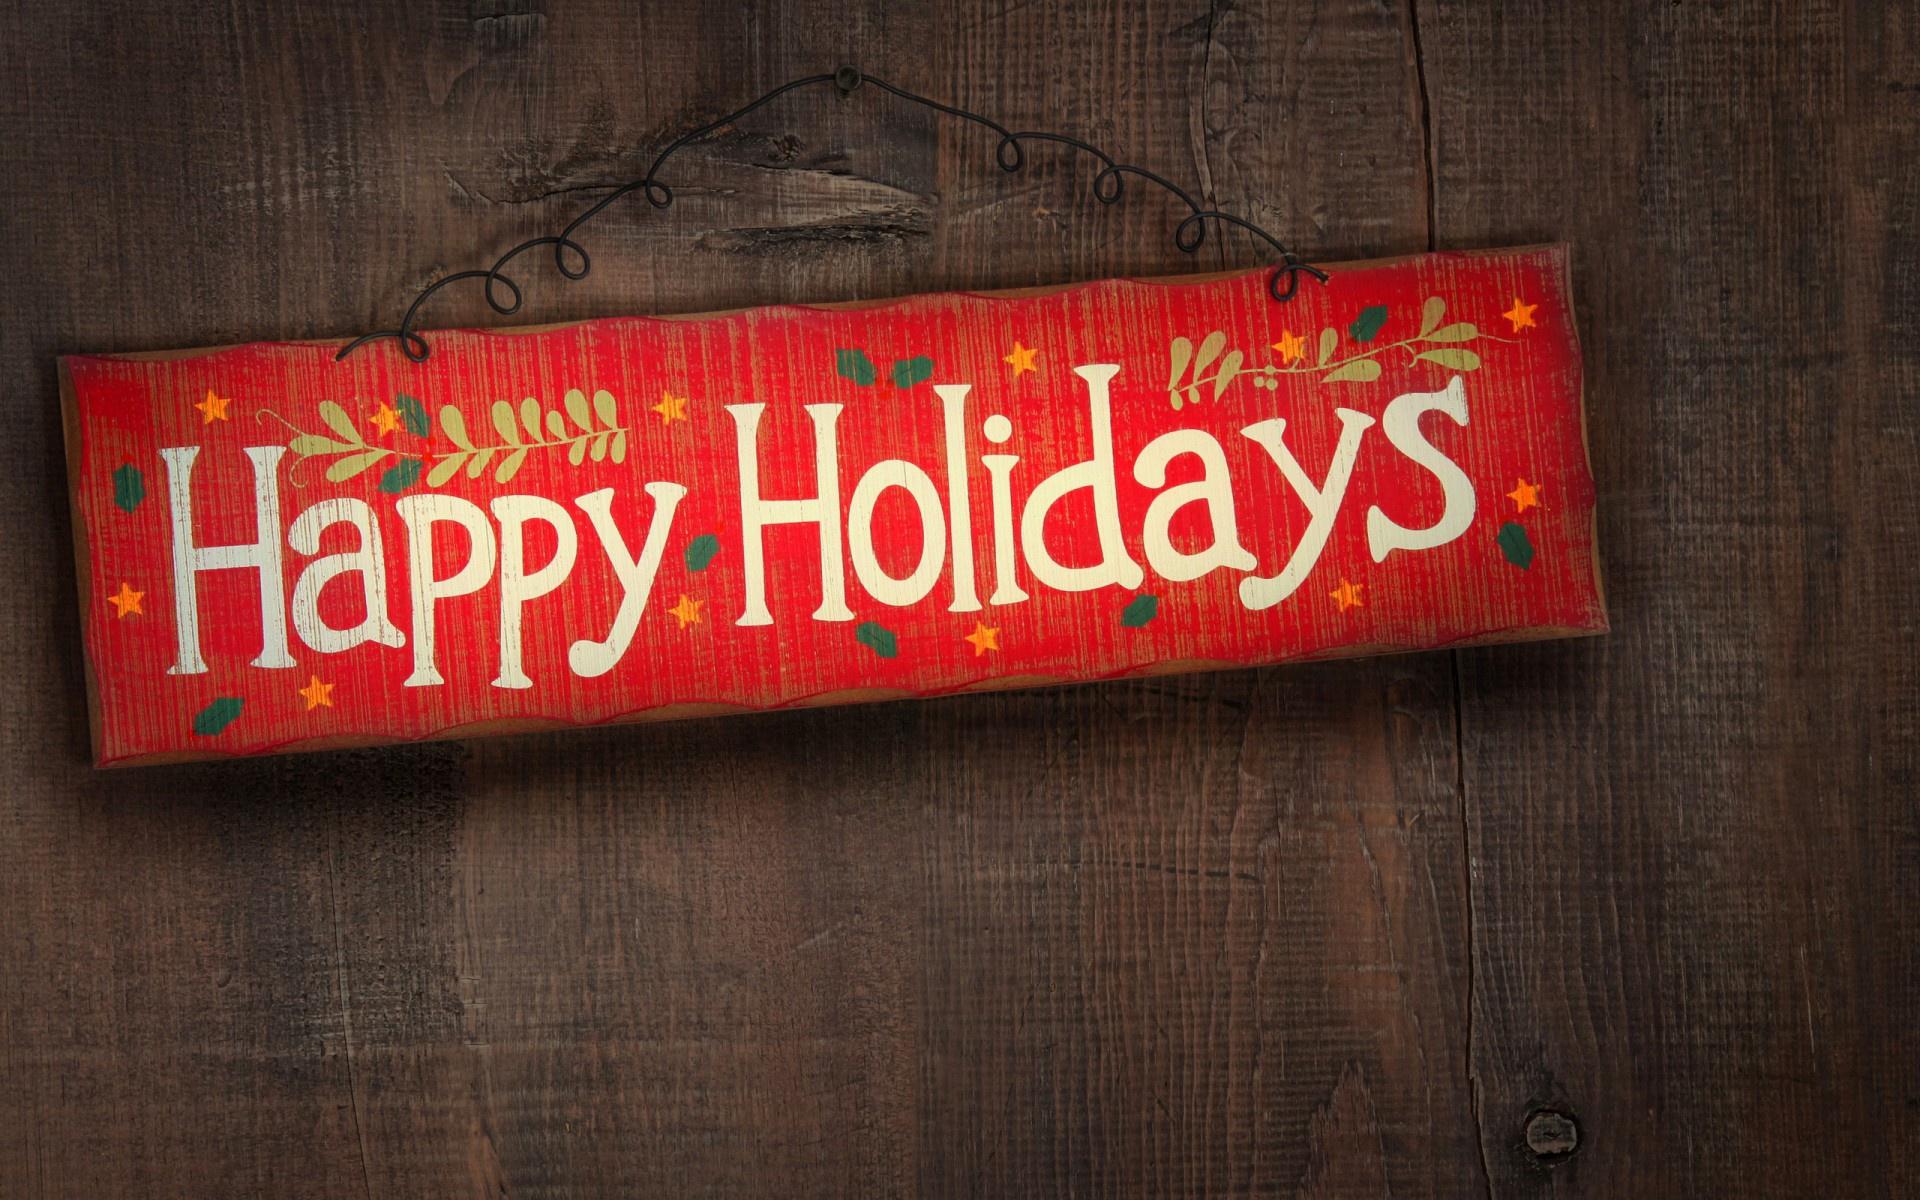 Happy Holiday Greetings Wallpape   rs - 1920x1200 - 320381